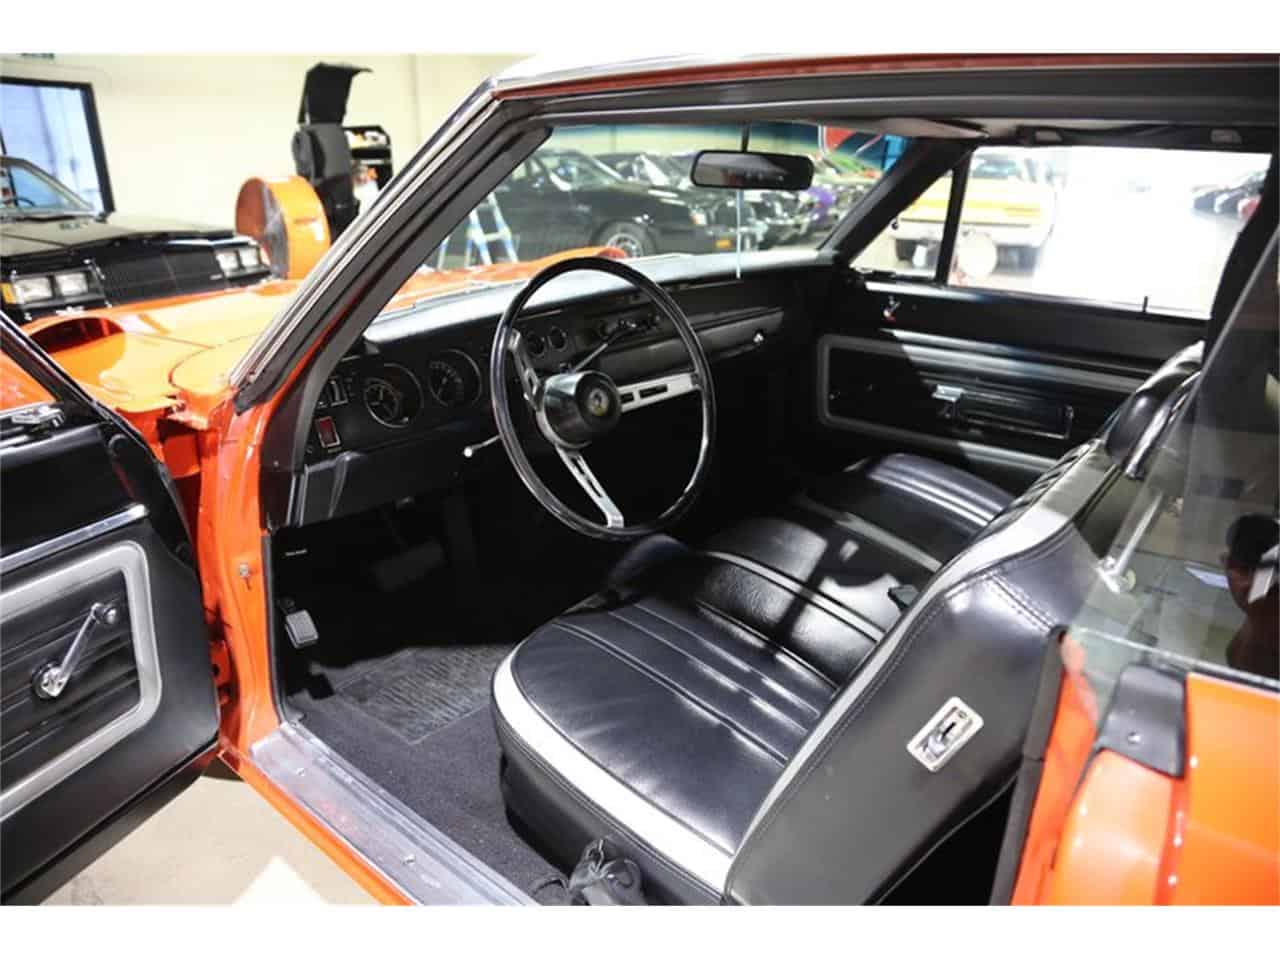 , Pick of the Day: 1970 Plymouth SuperBird, true homologation special, ClassicCars.com Journal